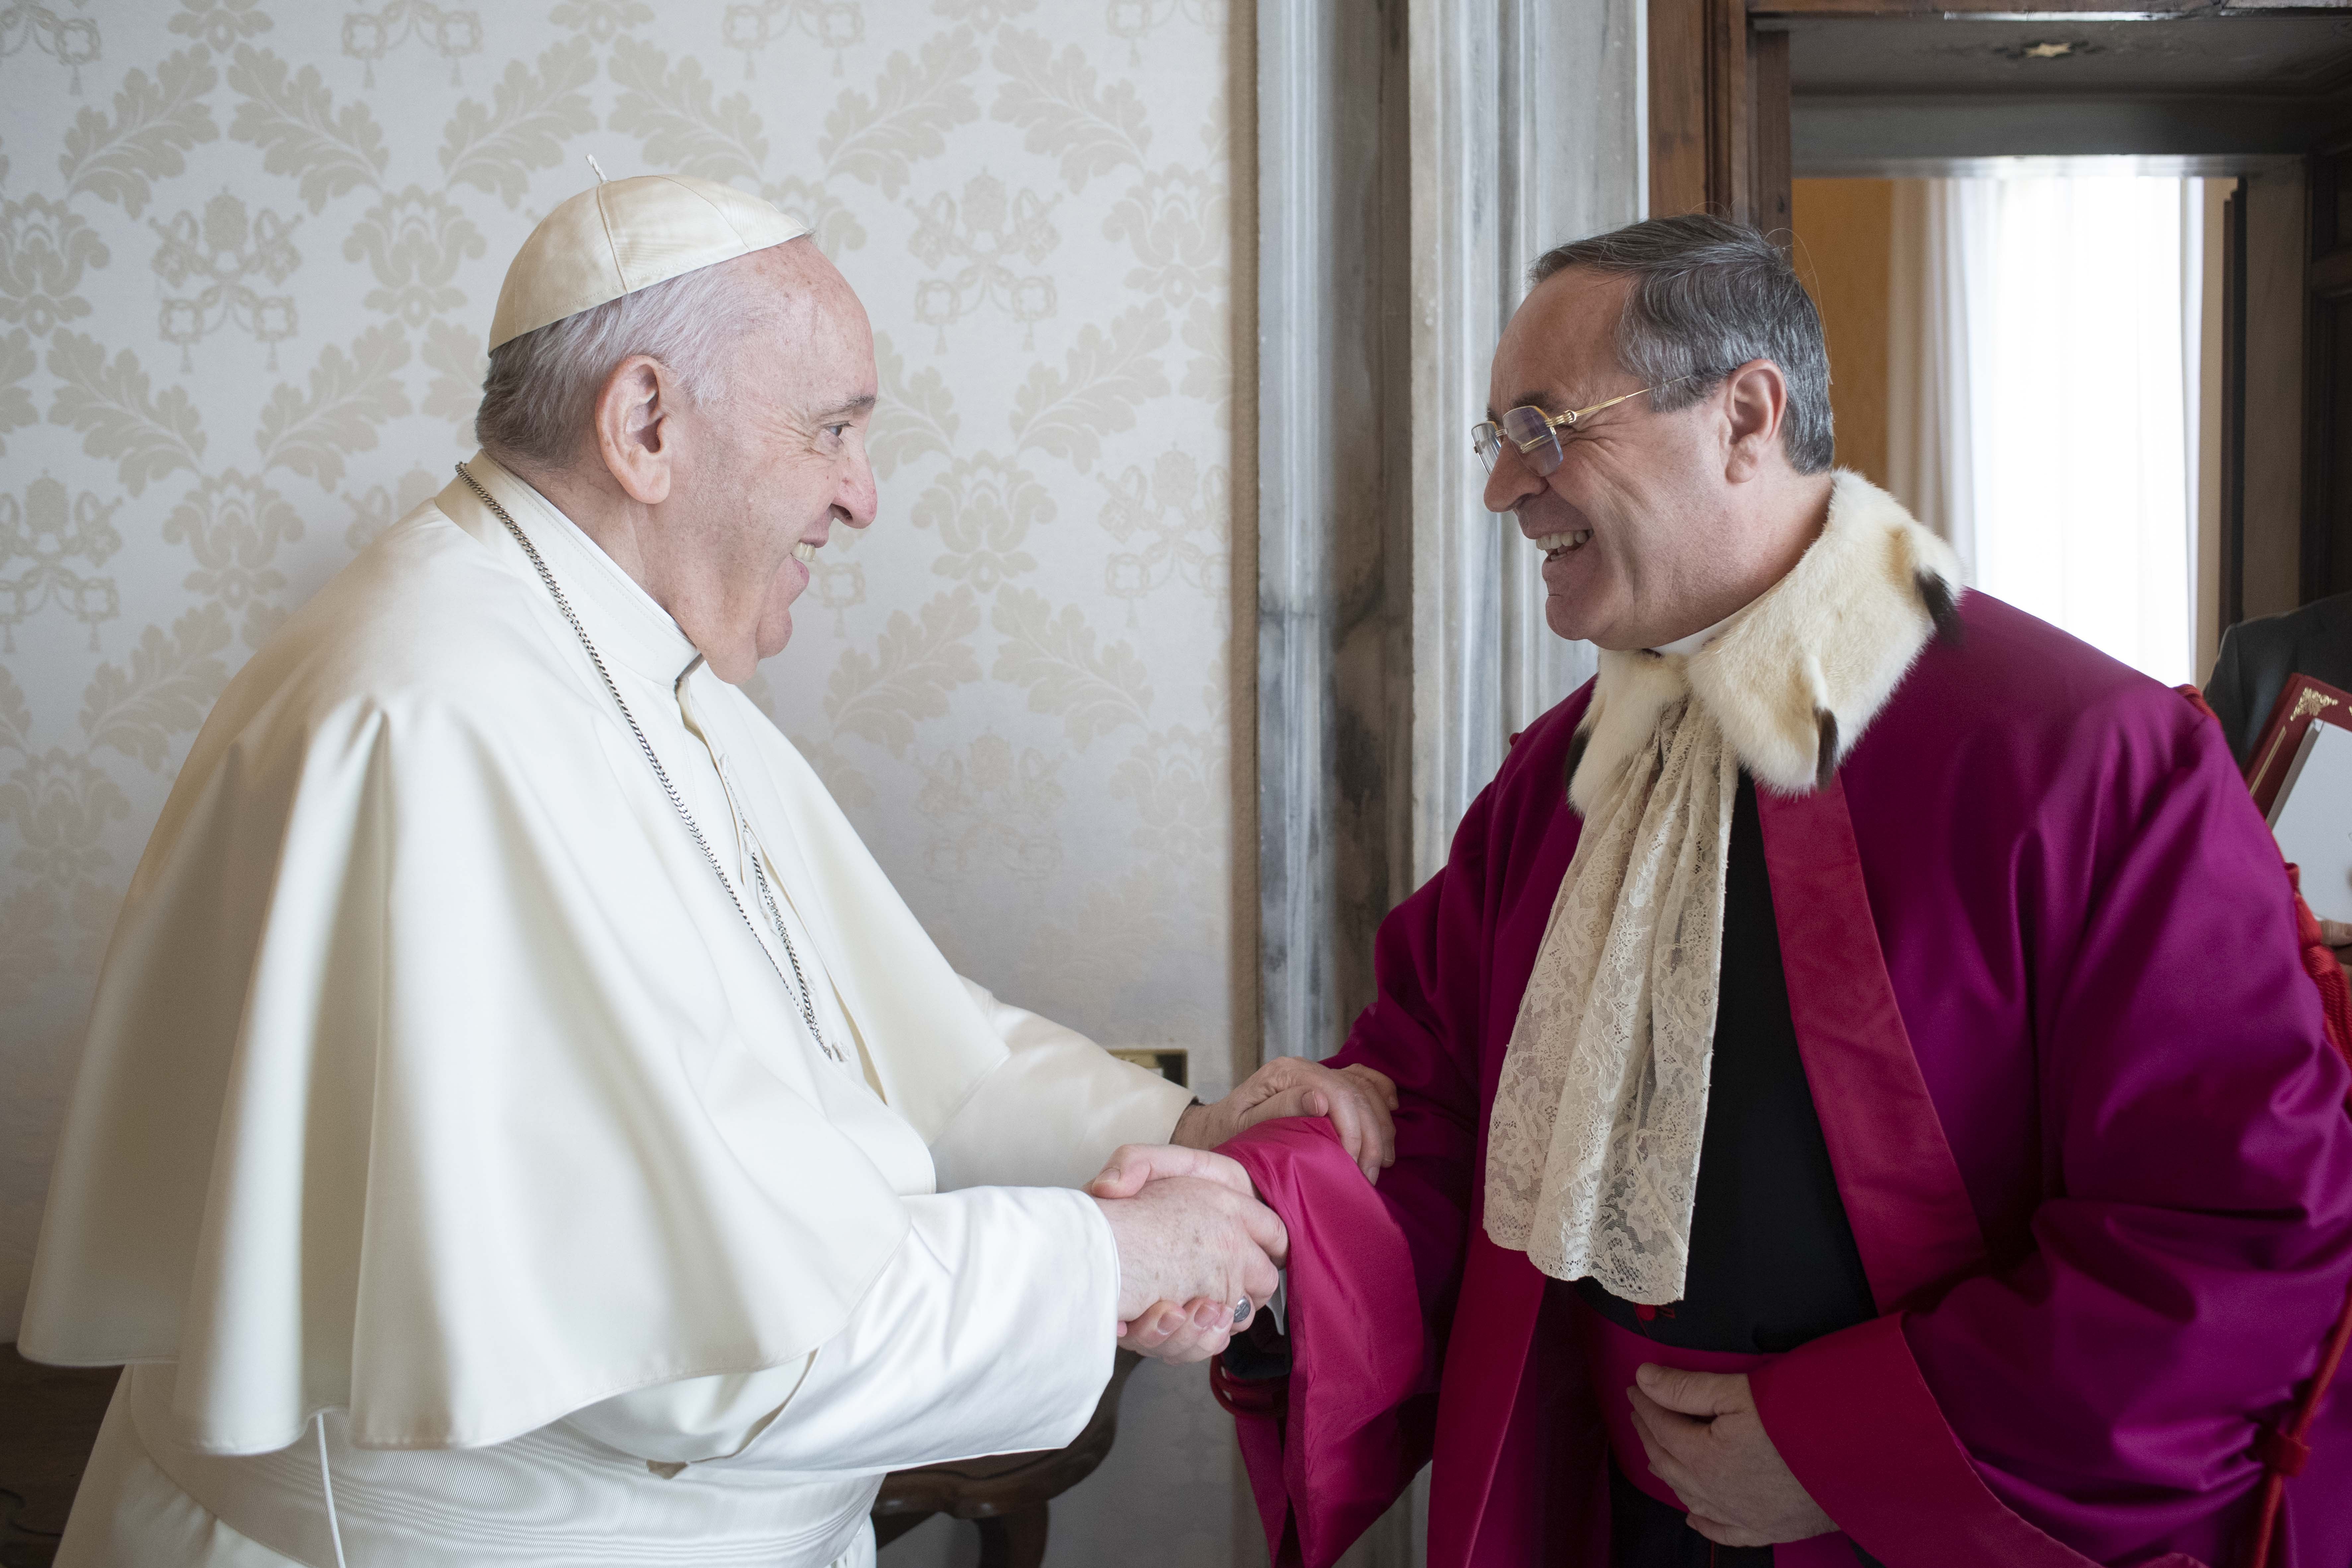 Pope Francis greets Msgr. Alejandro Arellano Cedillo, dean of the Roman Rota, during an annual audience with members of the Tribunal of the Roman Rota at the Vatican Jan. 27, 2022.. (CNS photo/Vatican Media)